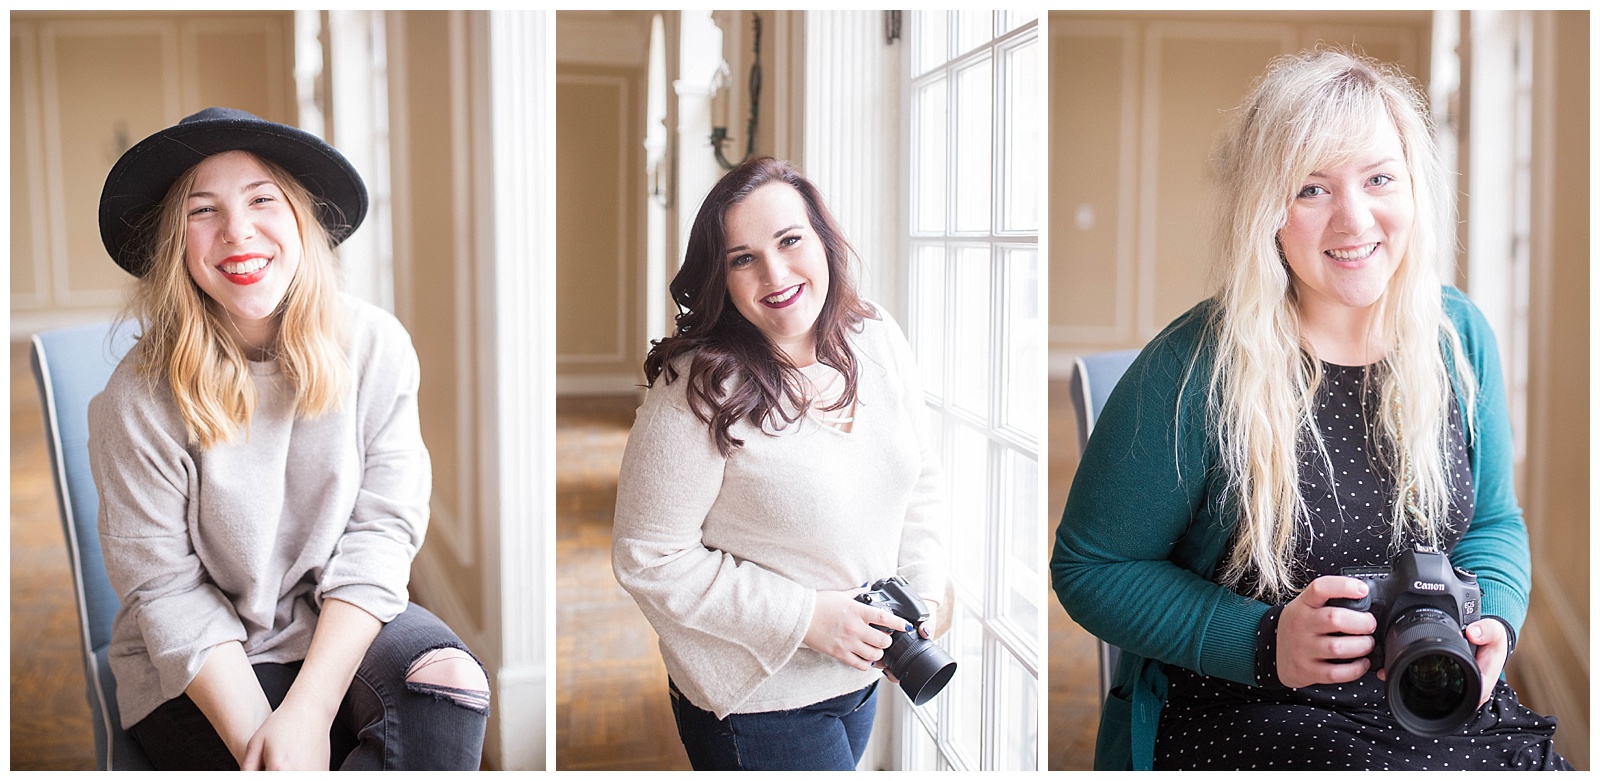 Monica Brown Photography Workshop Experience | Oxford, Ohio Wedding Inspiration | monicabrownphoto.com